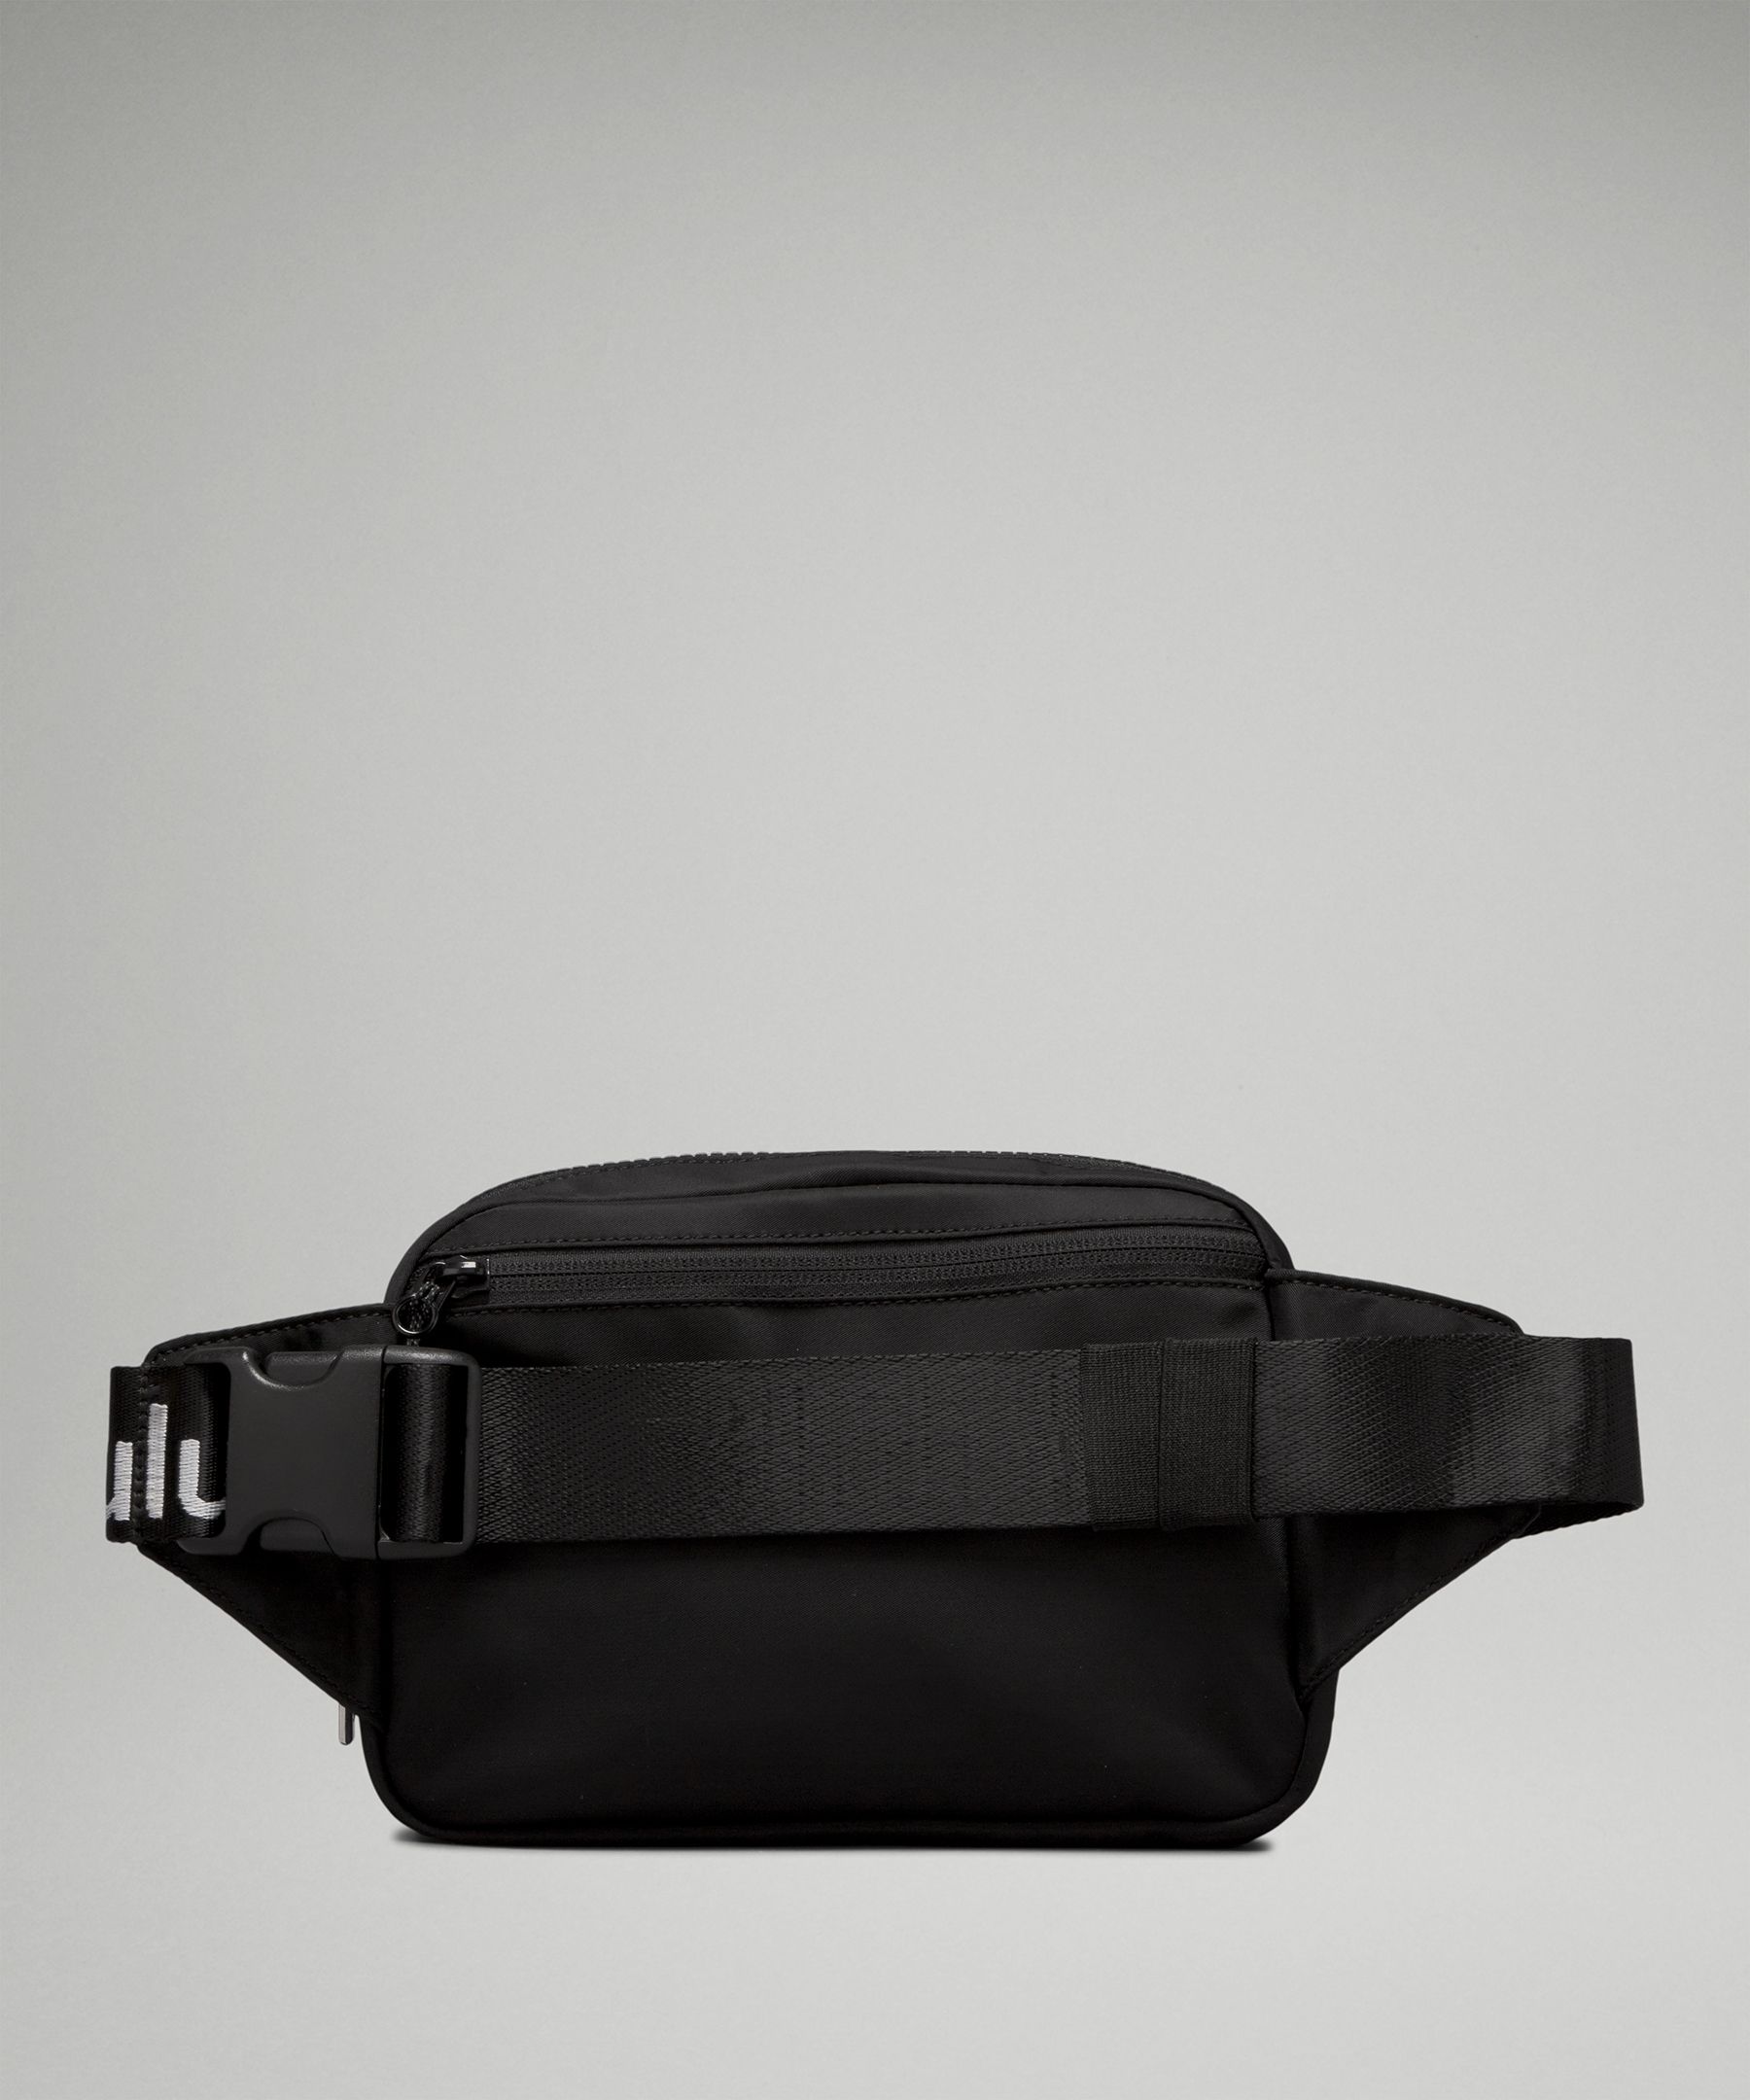 Lululemon Everywhere Belt Bag Large 2L In Stock Availability and Price